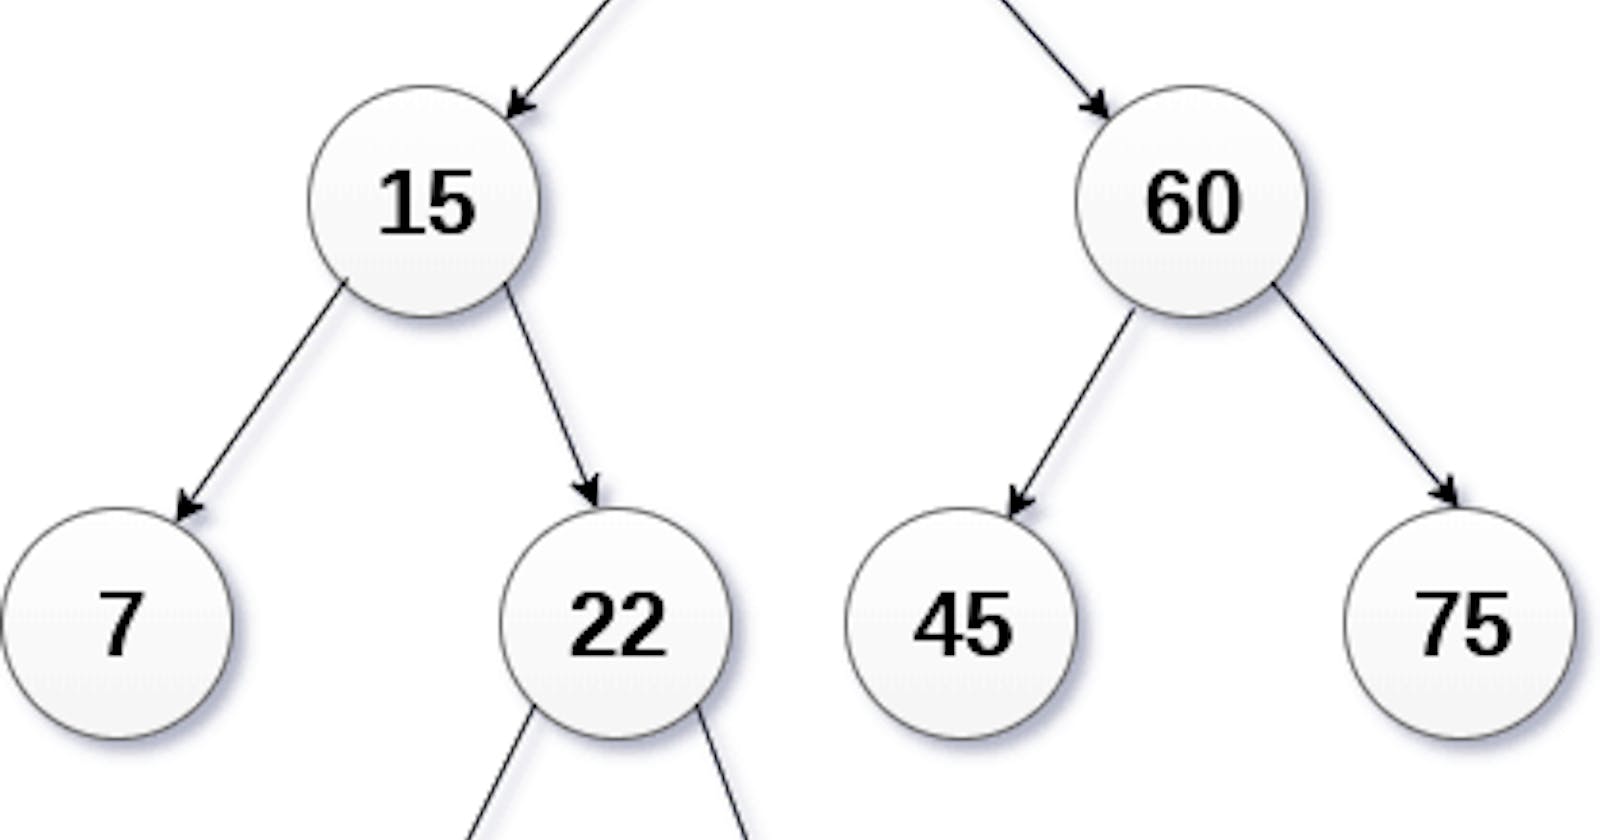 Binary Trees In Data Structure Made Easy